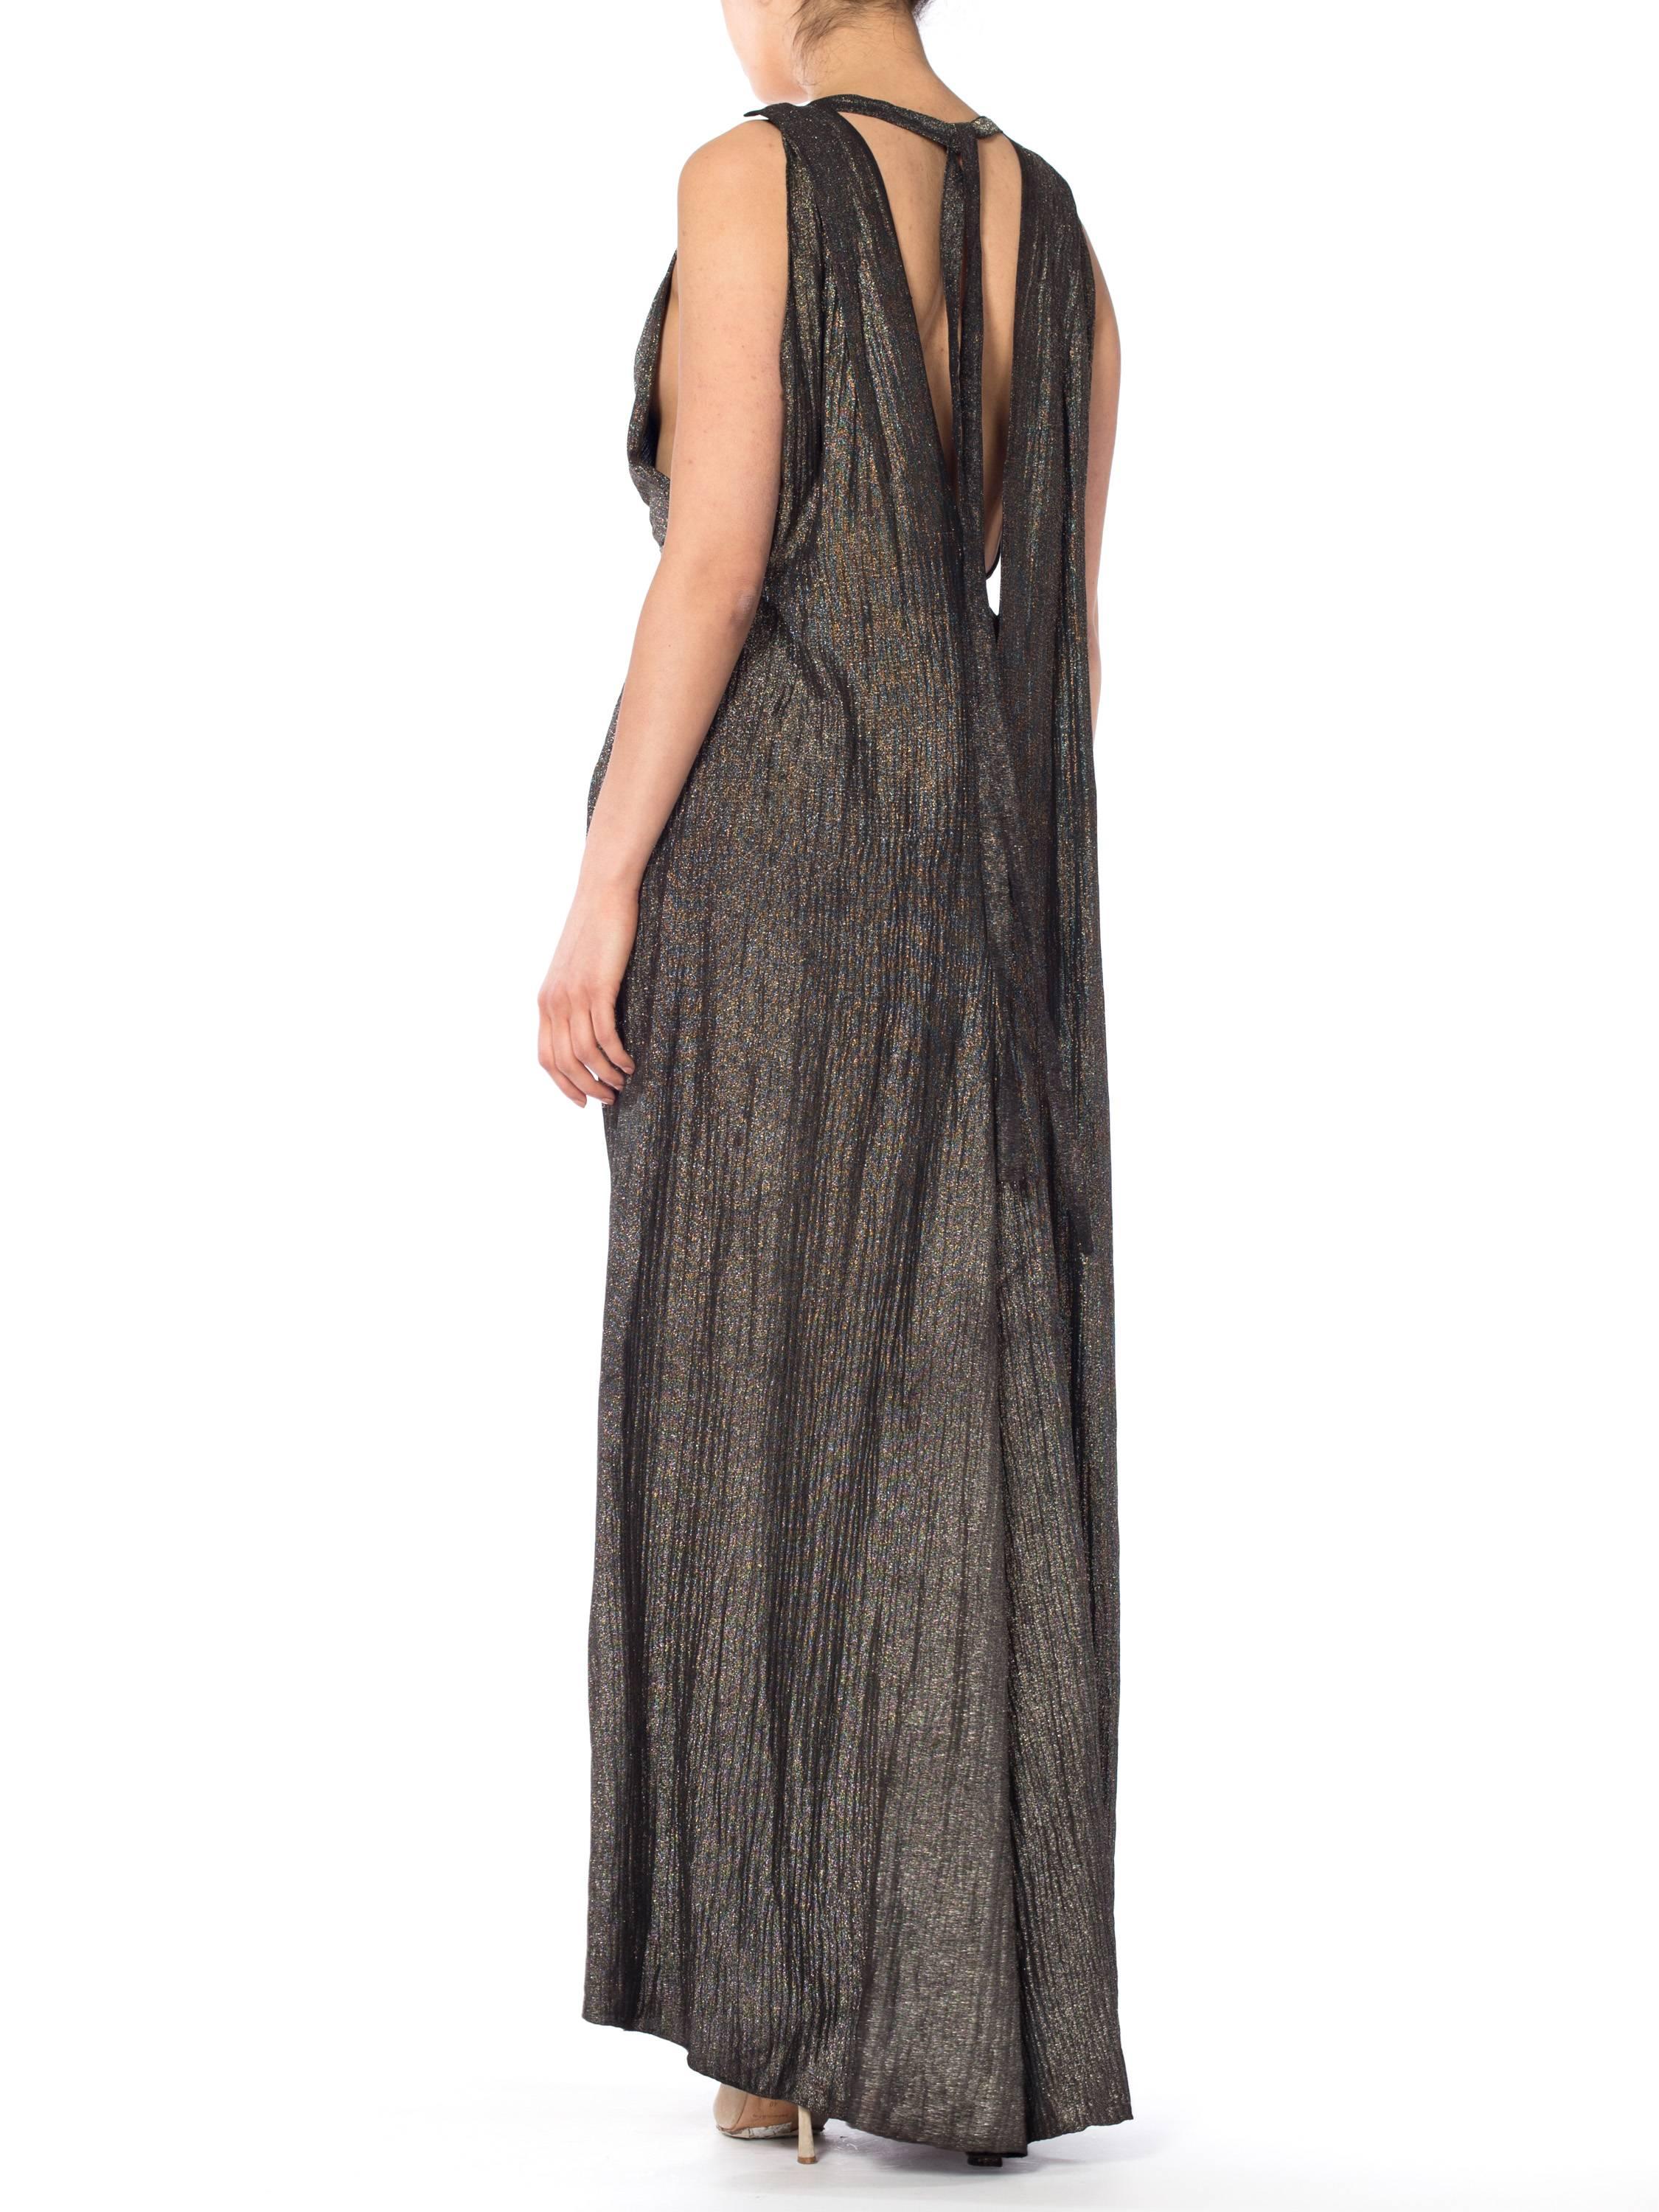 MORPHEW COLLECTION Black & Gold Antique Patina Silk Lamé  Gown With Low Back And Caped Train
MORPHEW COLLECTION is made entirely by hand in our NYC Ateliér of rare antique materials sourced from around the globe. Our sustainable vintage materials